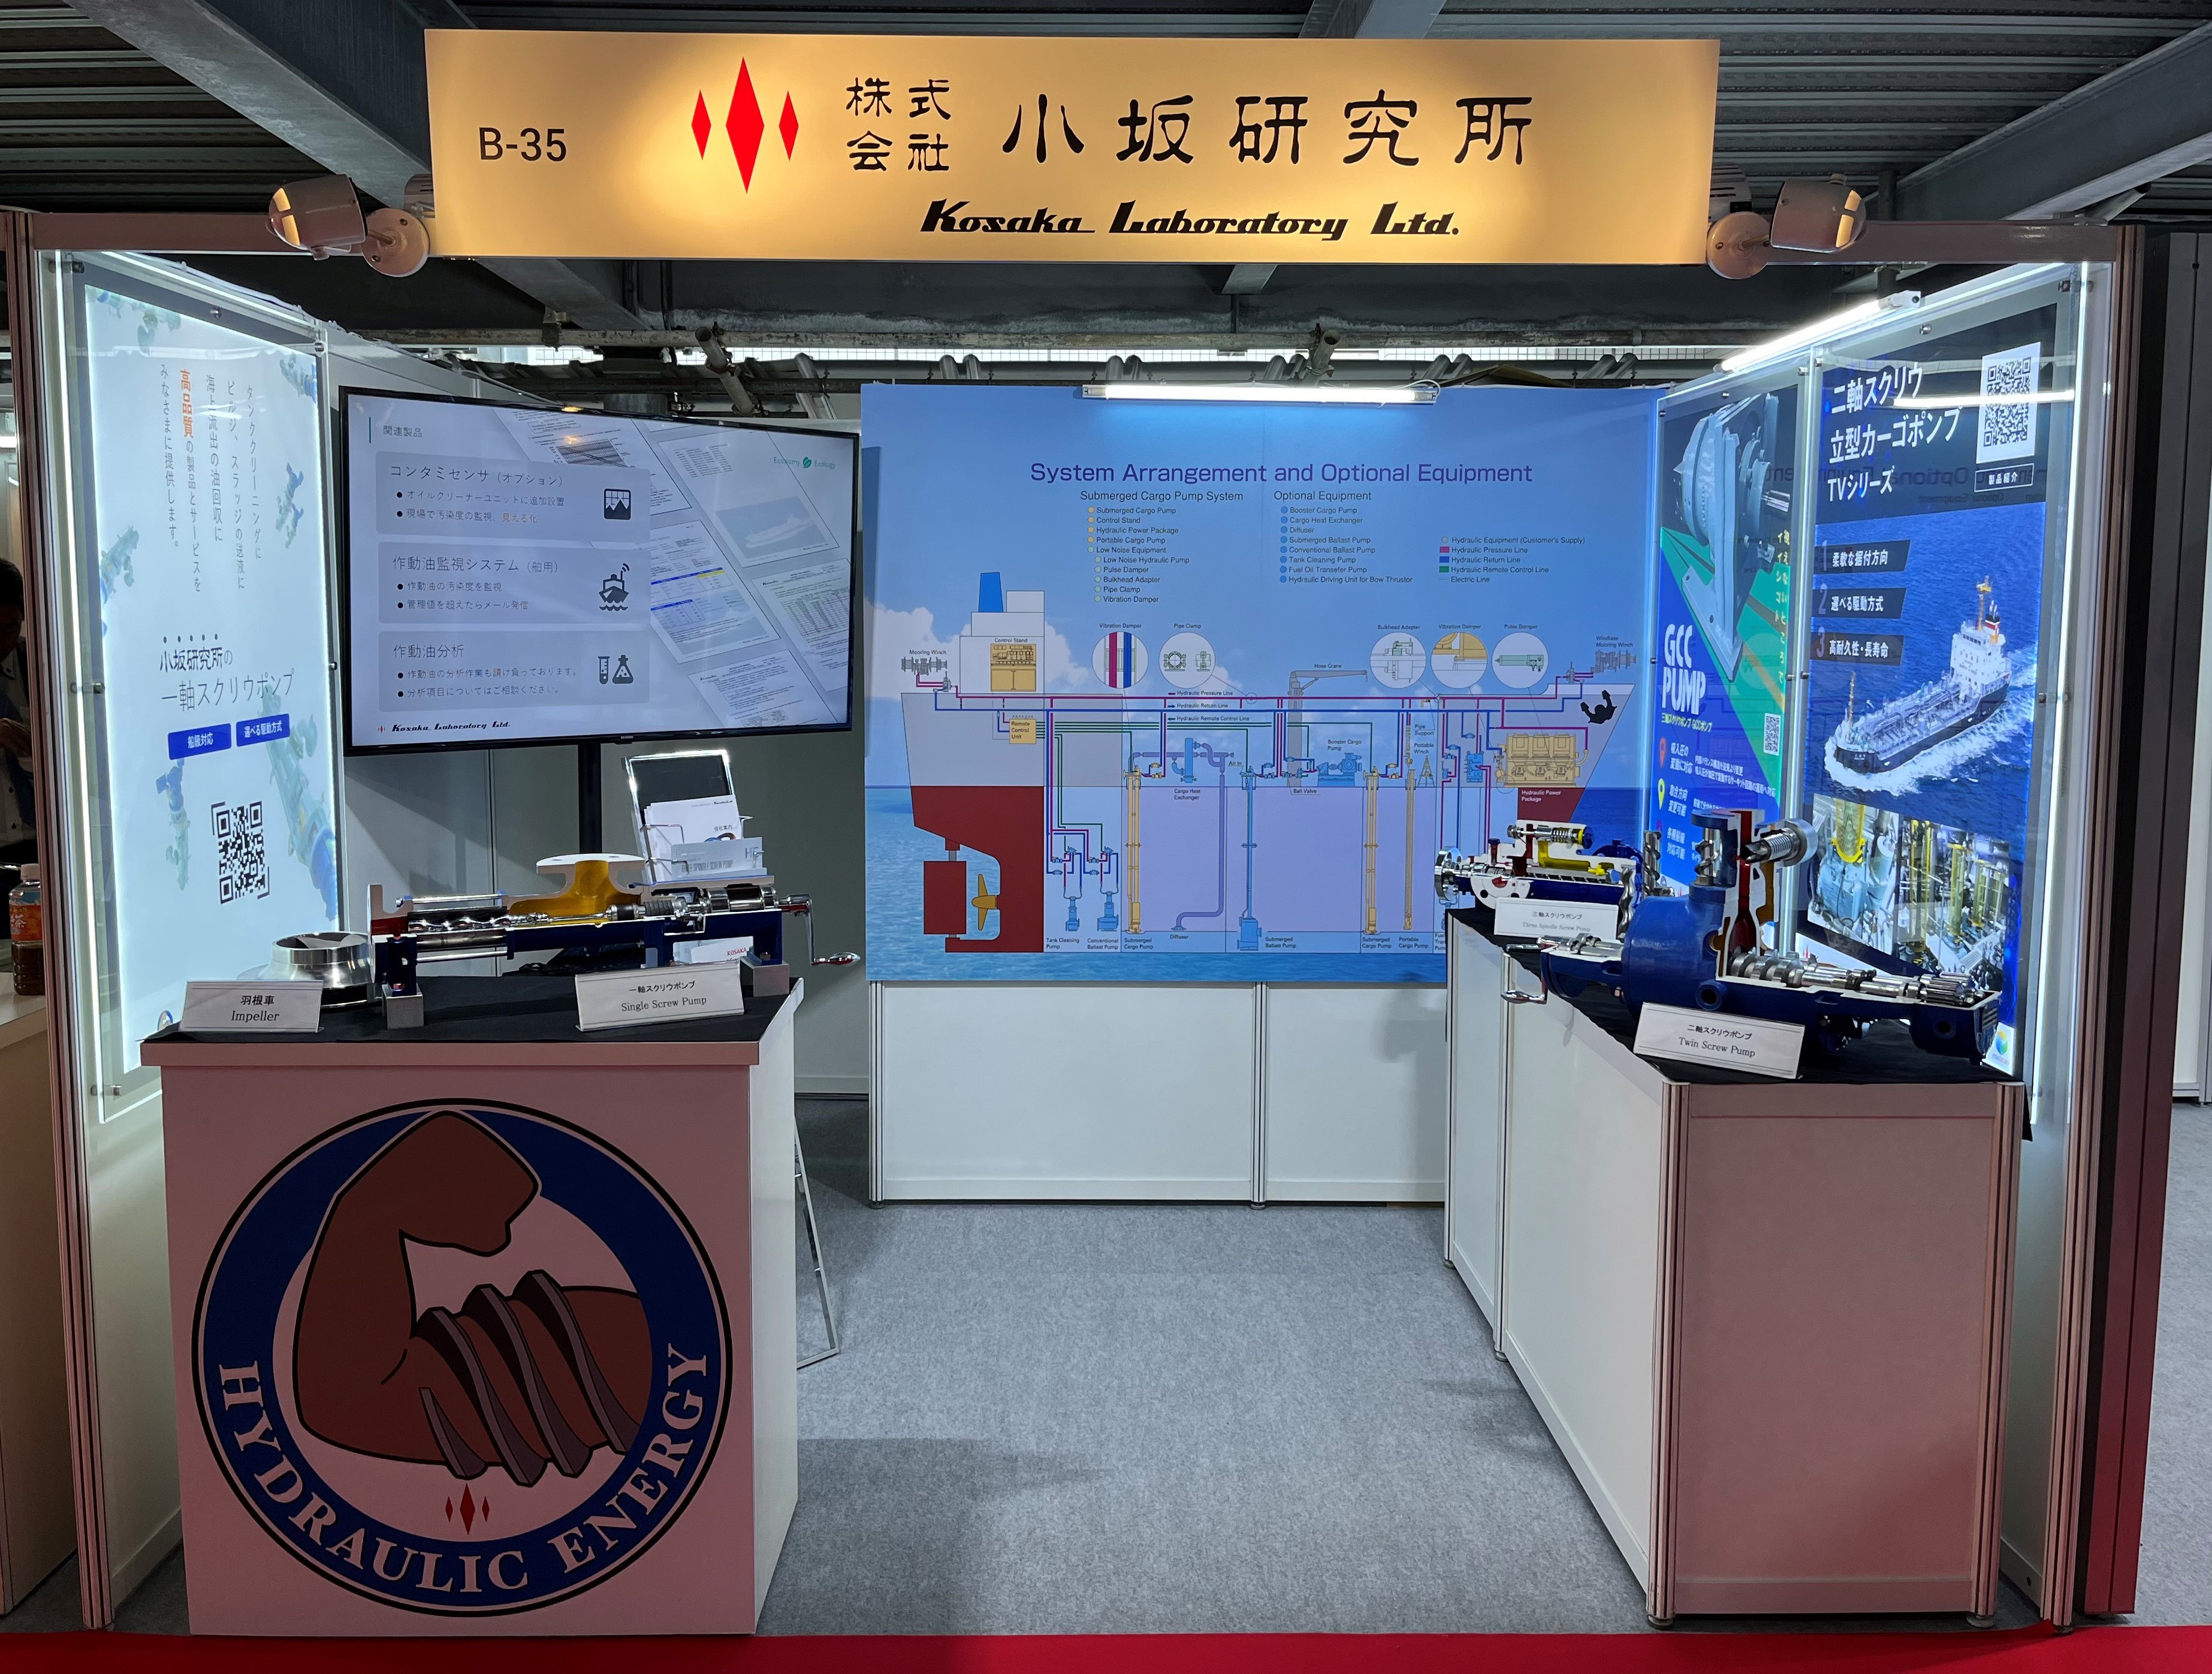 Thank you very much for visiting our booth at BARI-SHIP 2023.